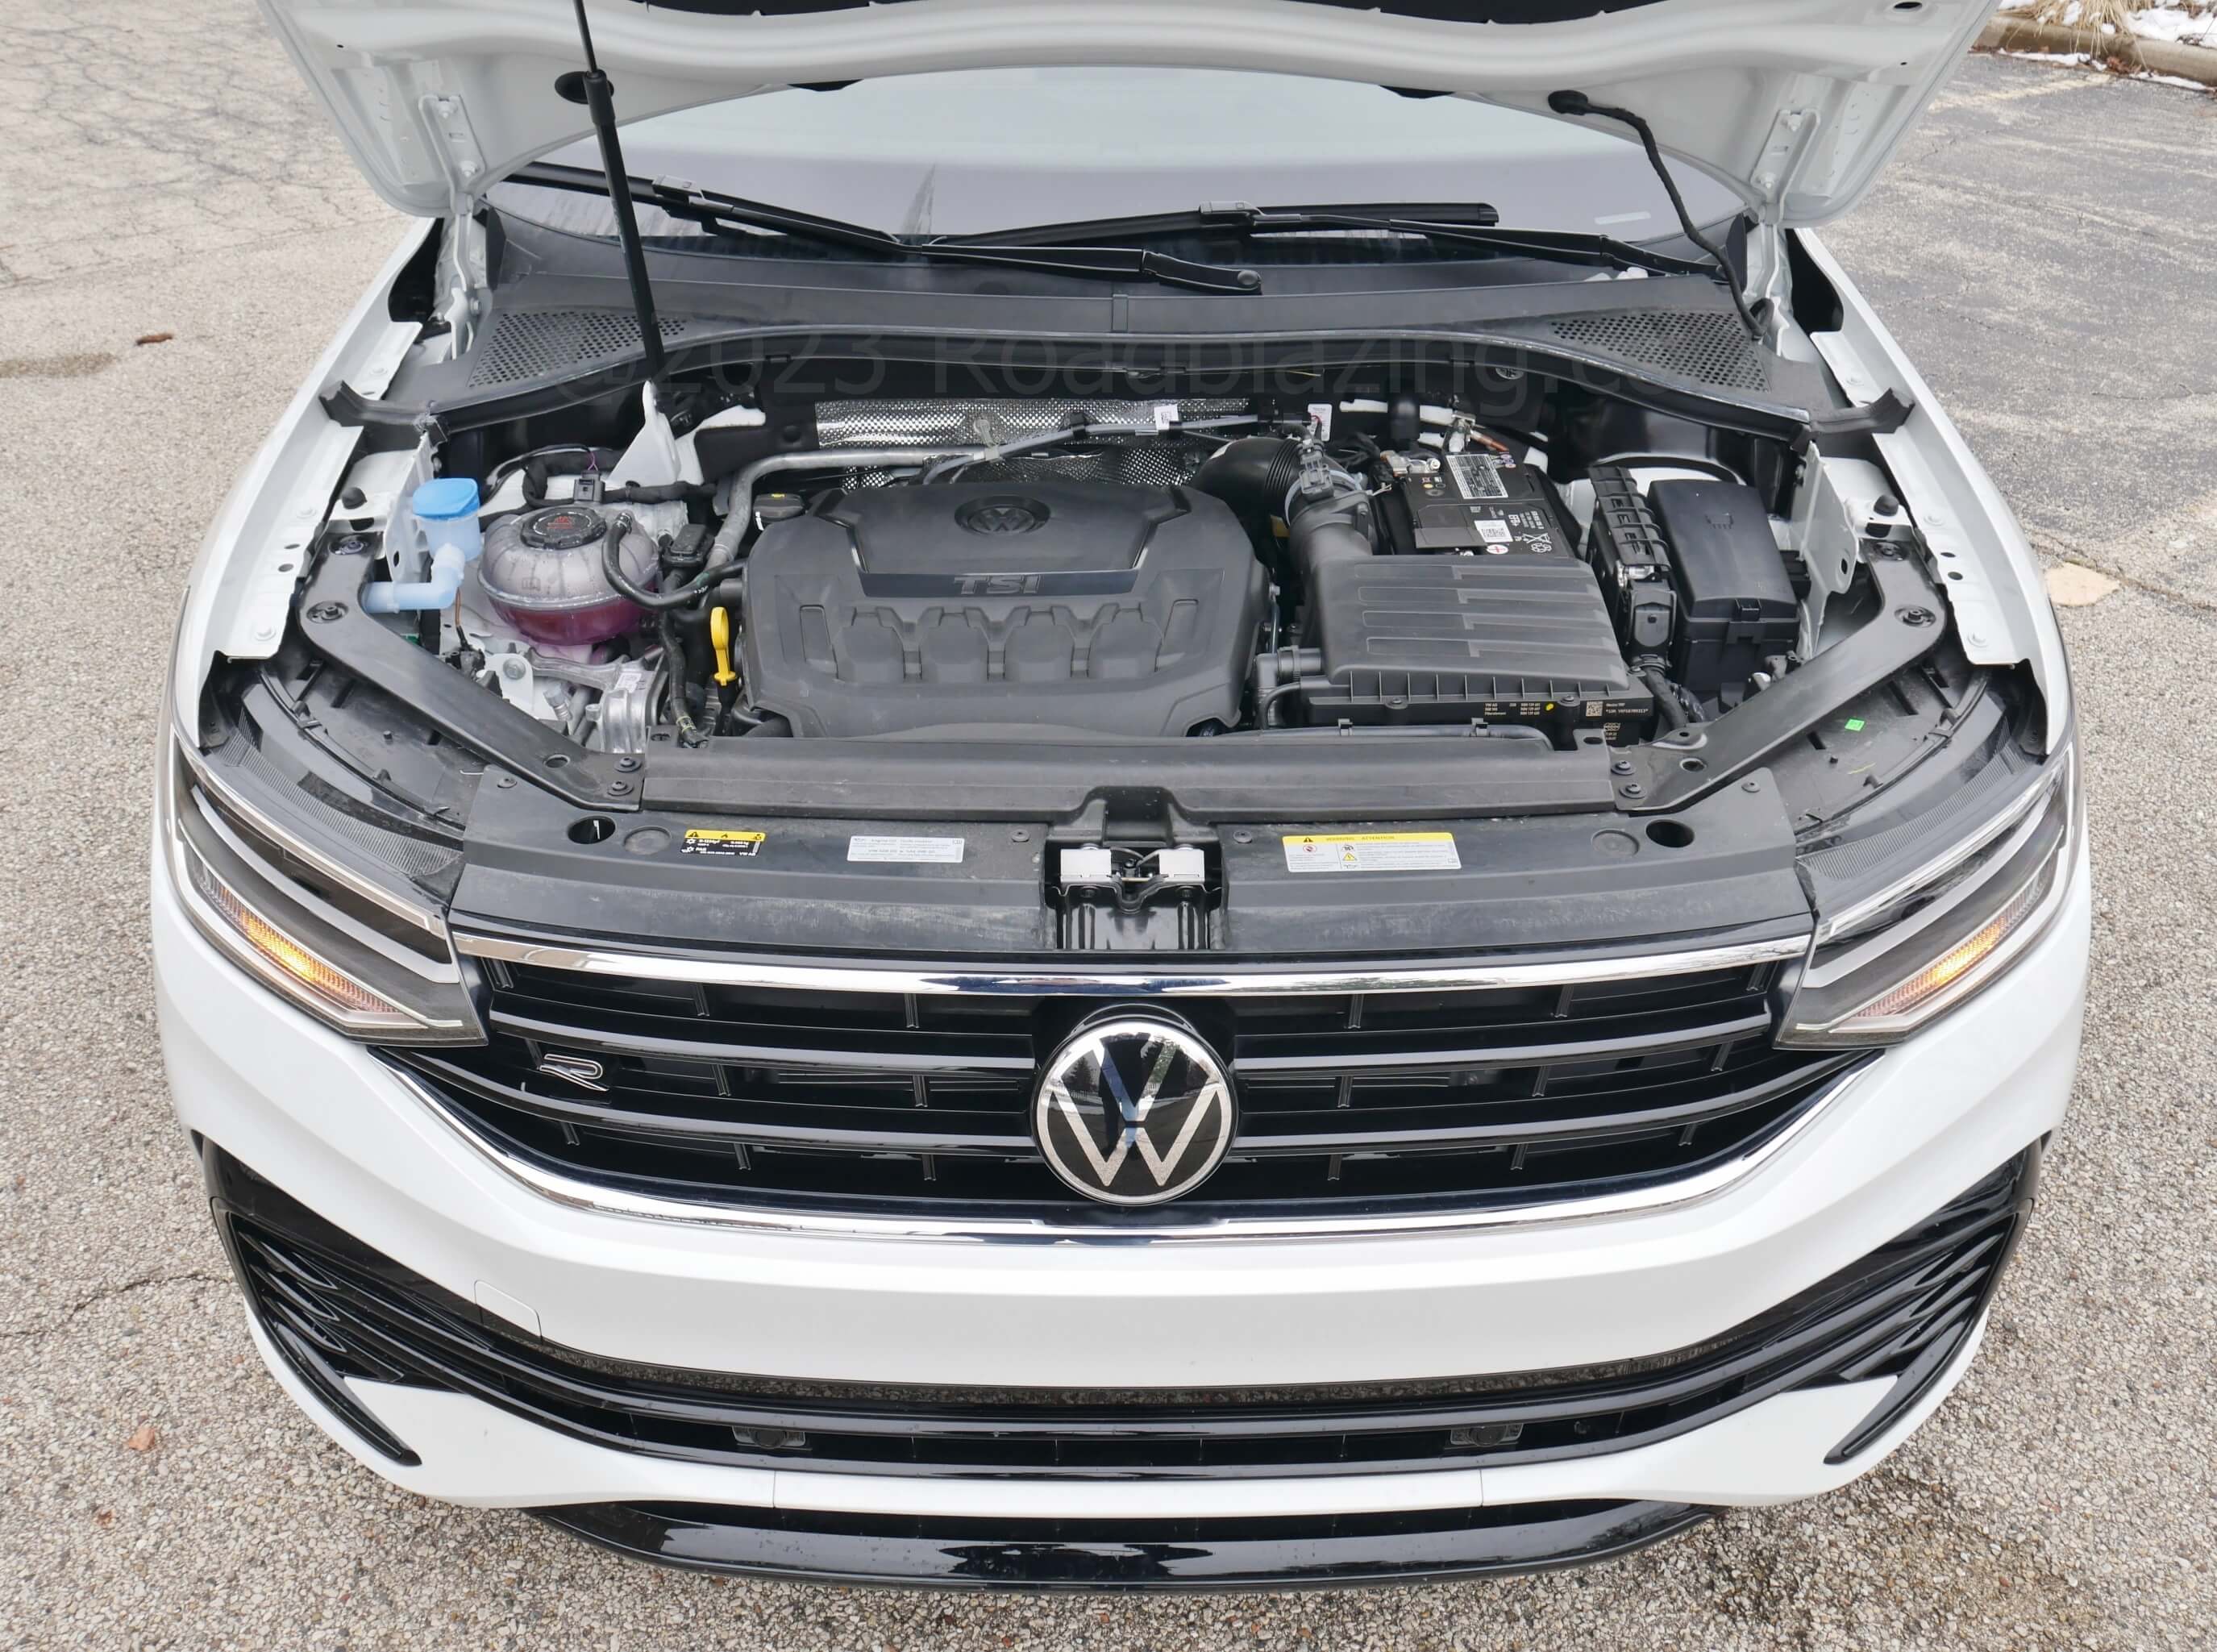 2023 Volkswagen Tiguan SE R-Line Black 3-Row: Miller Cycle turbo gas EA-888 I-4 churns out 220 lb-ft, delivering 28 miles per gallon with the 8-speed manumatic transaxle